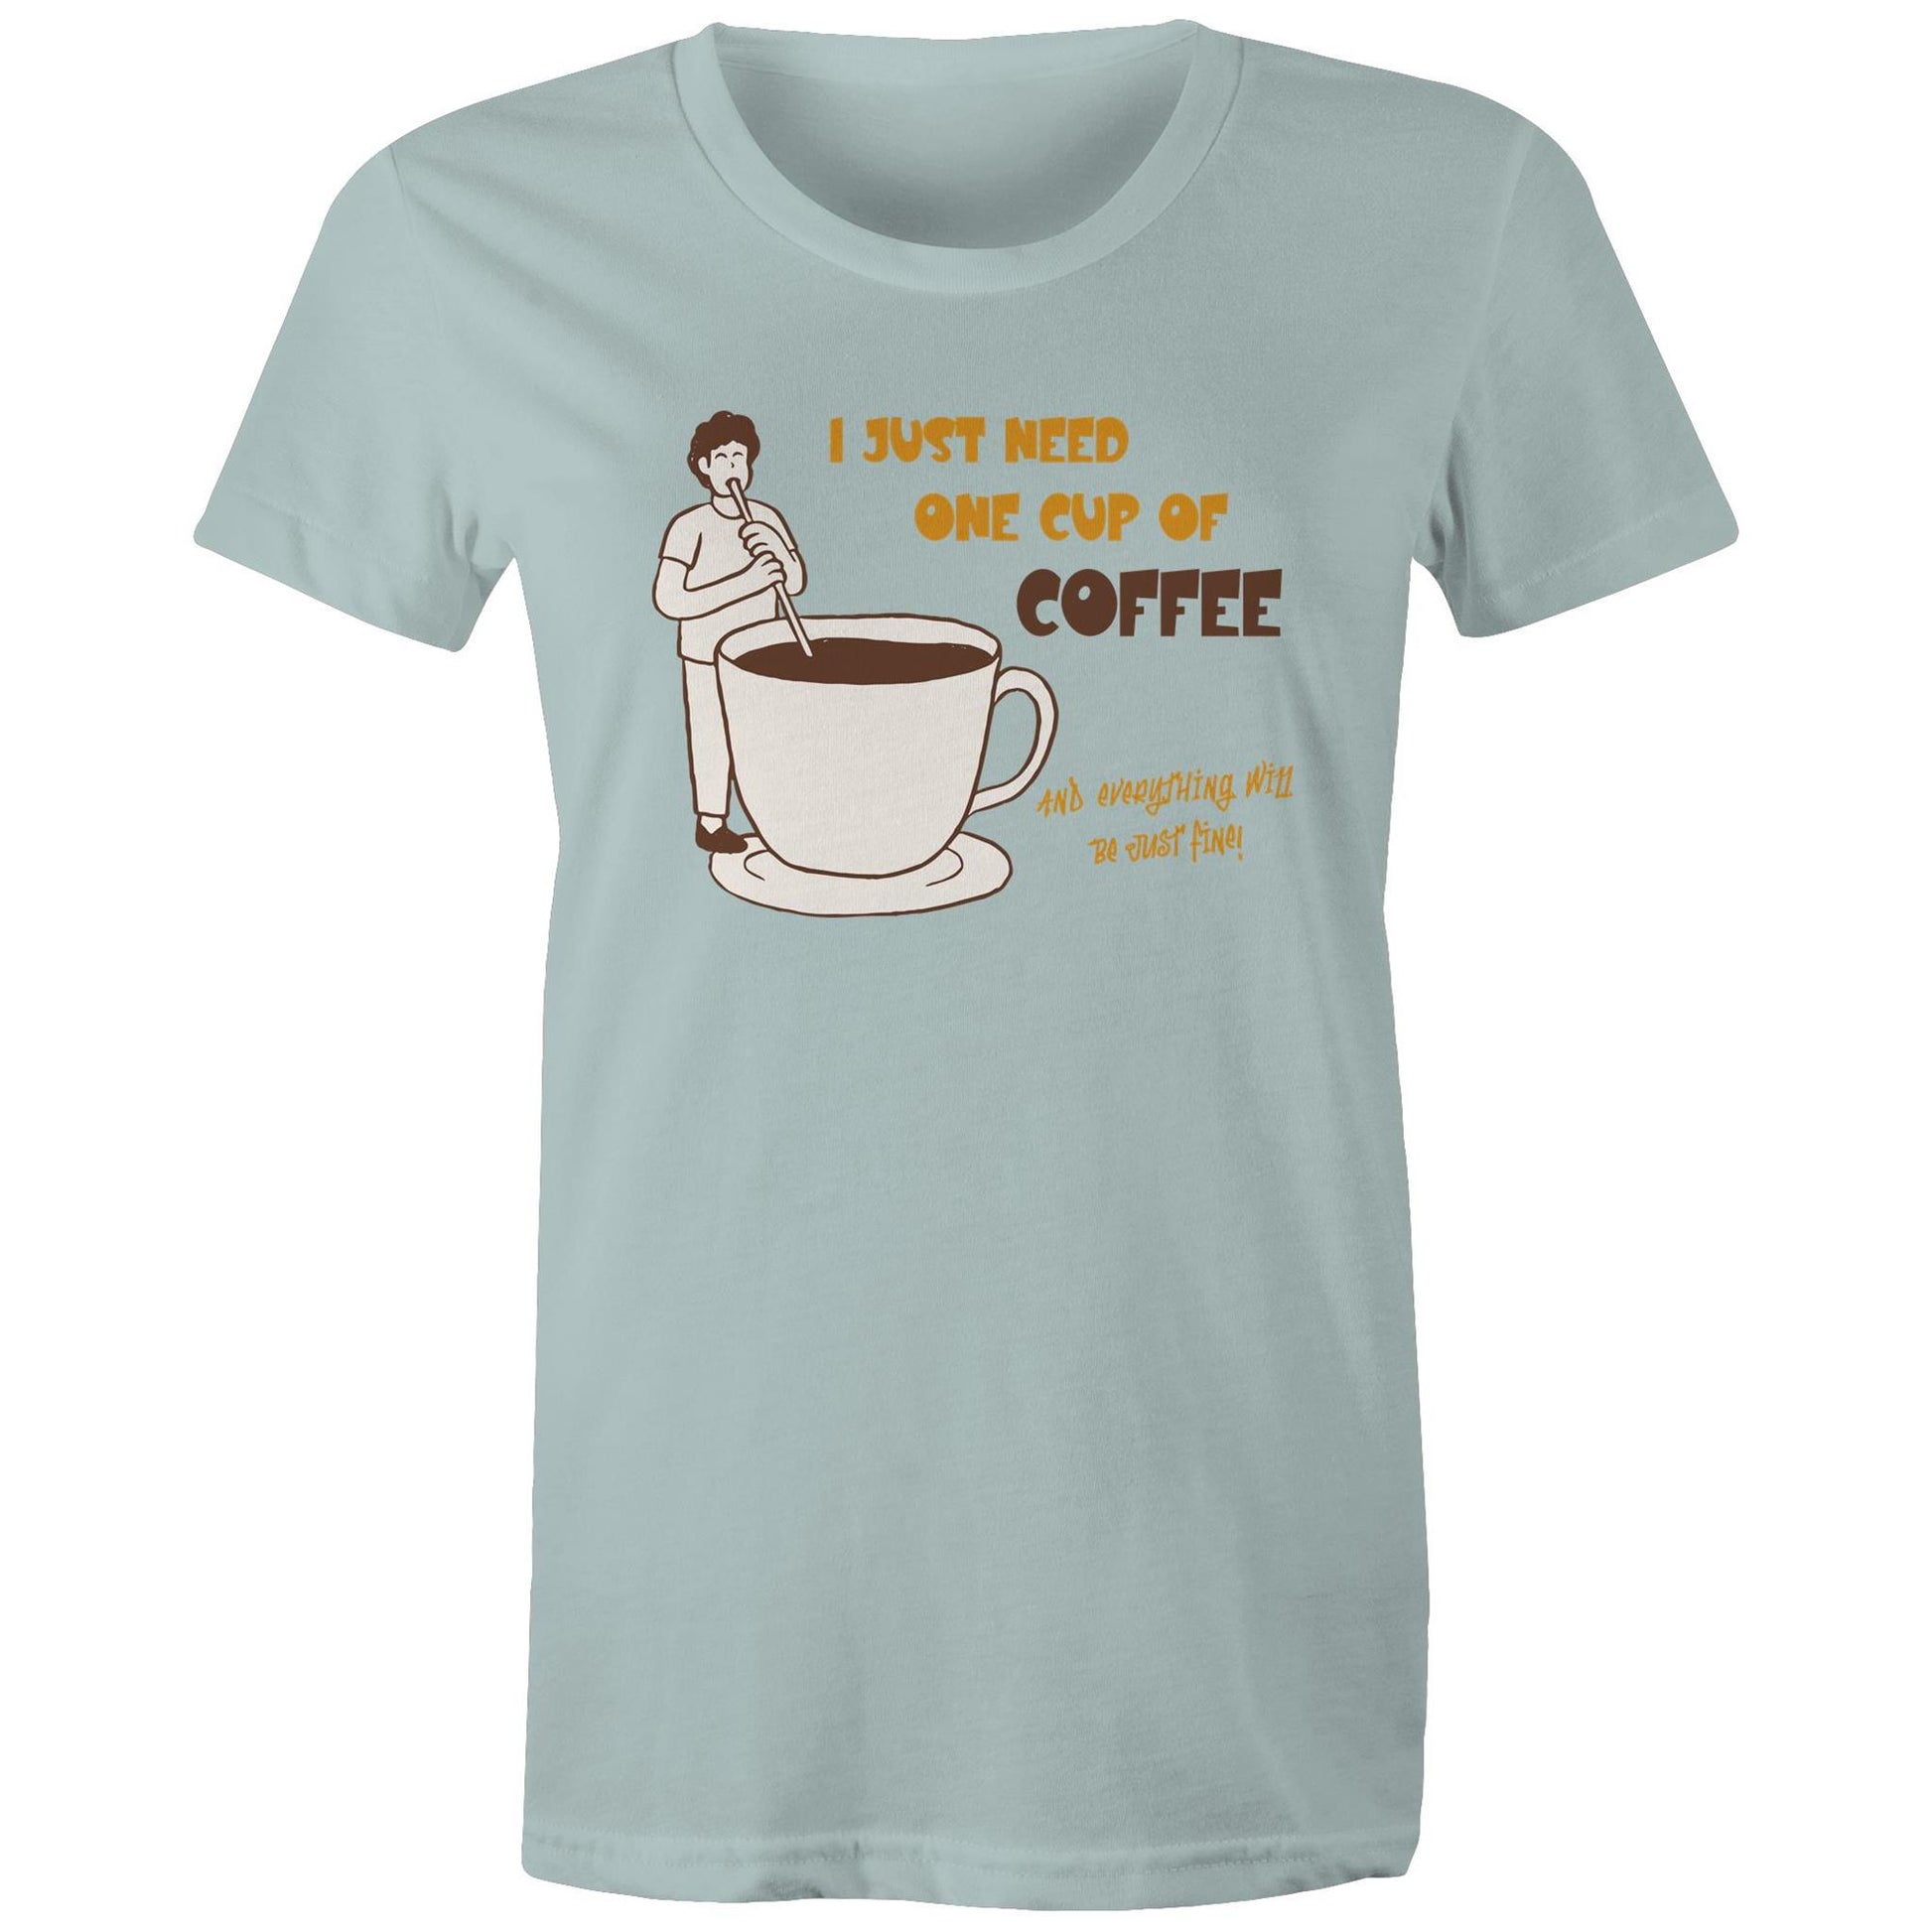 I Just Need One Cup Of Coffee And Everything Will Be Just Fine - Womens T-shirt Pale Blue Womens T-shirt Coffee